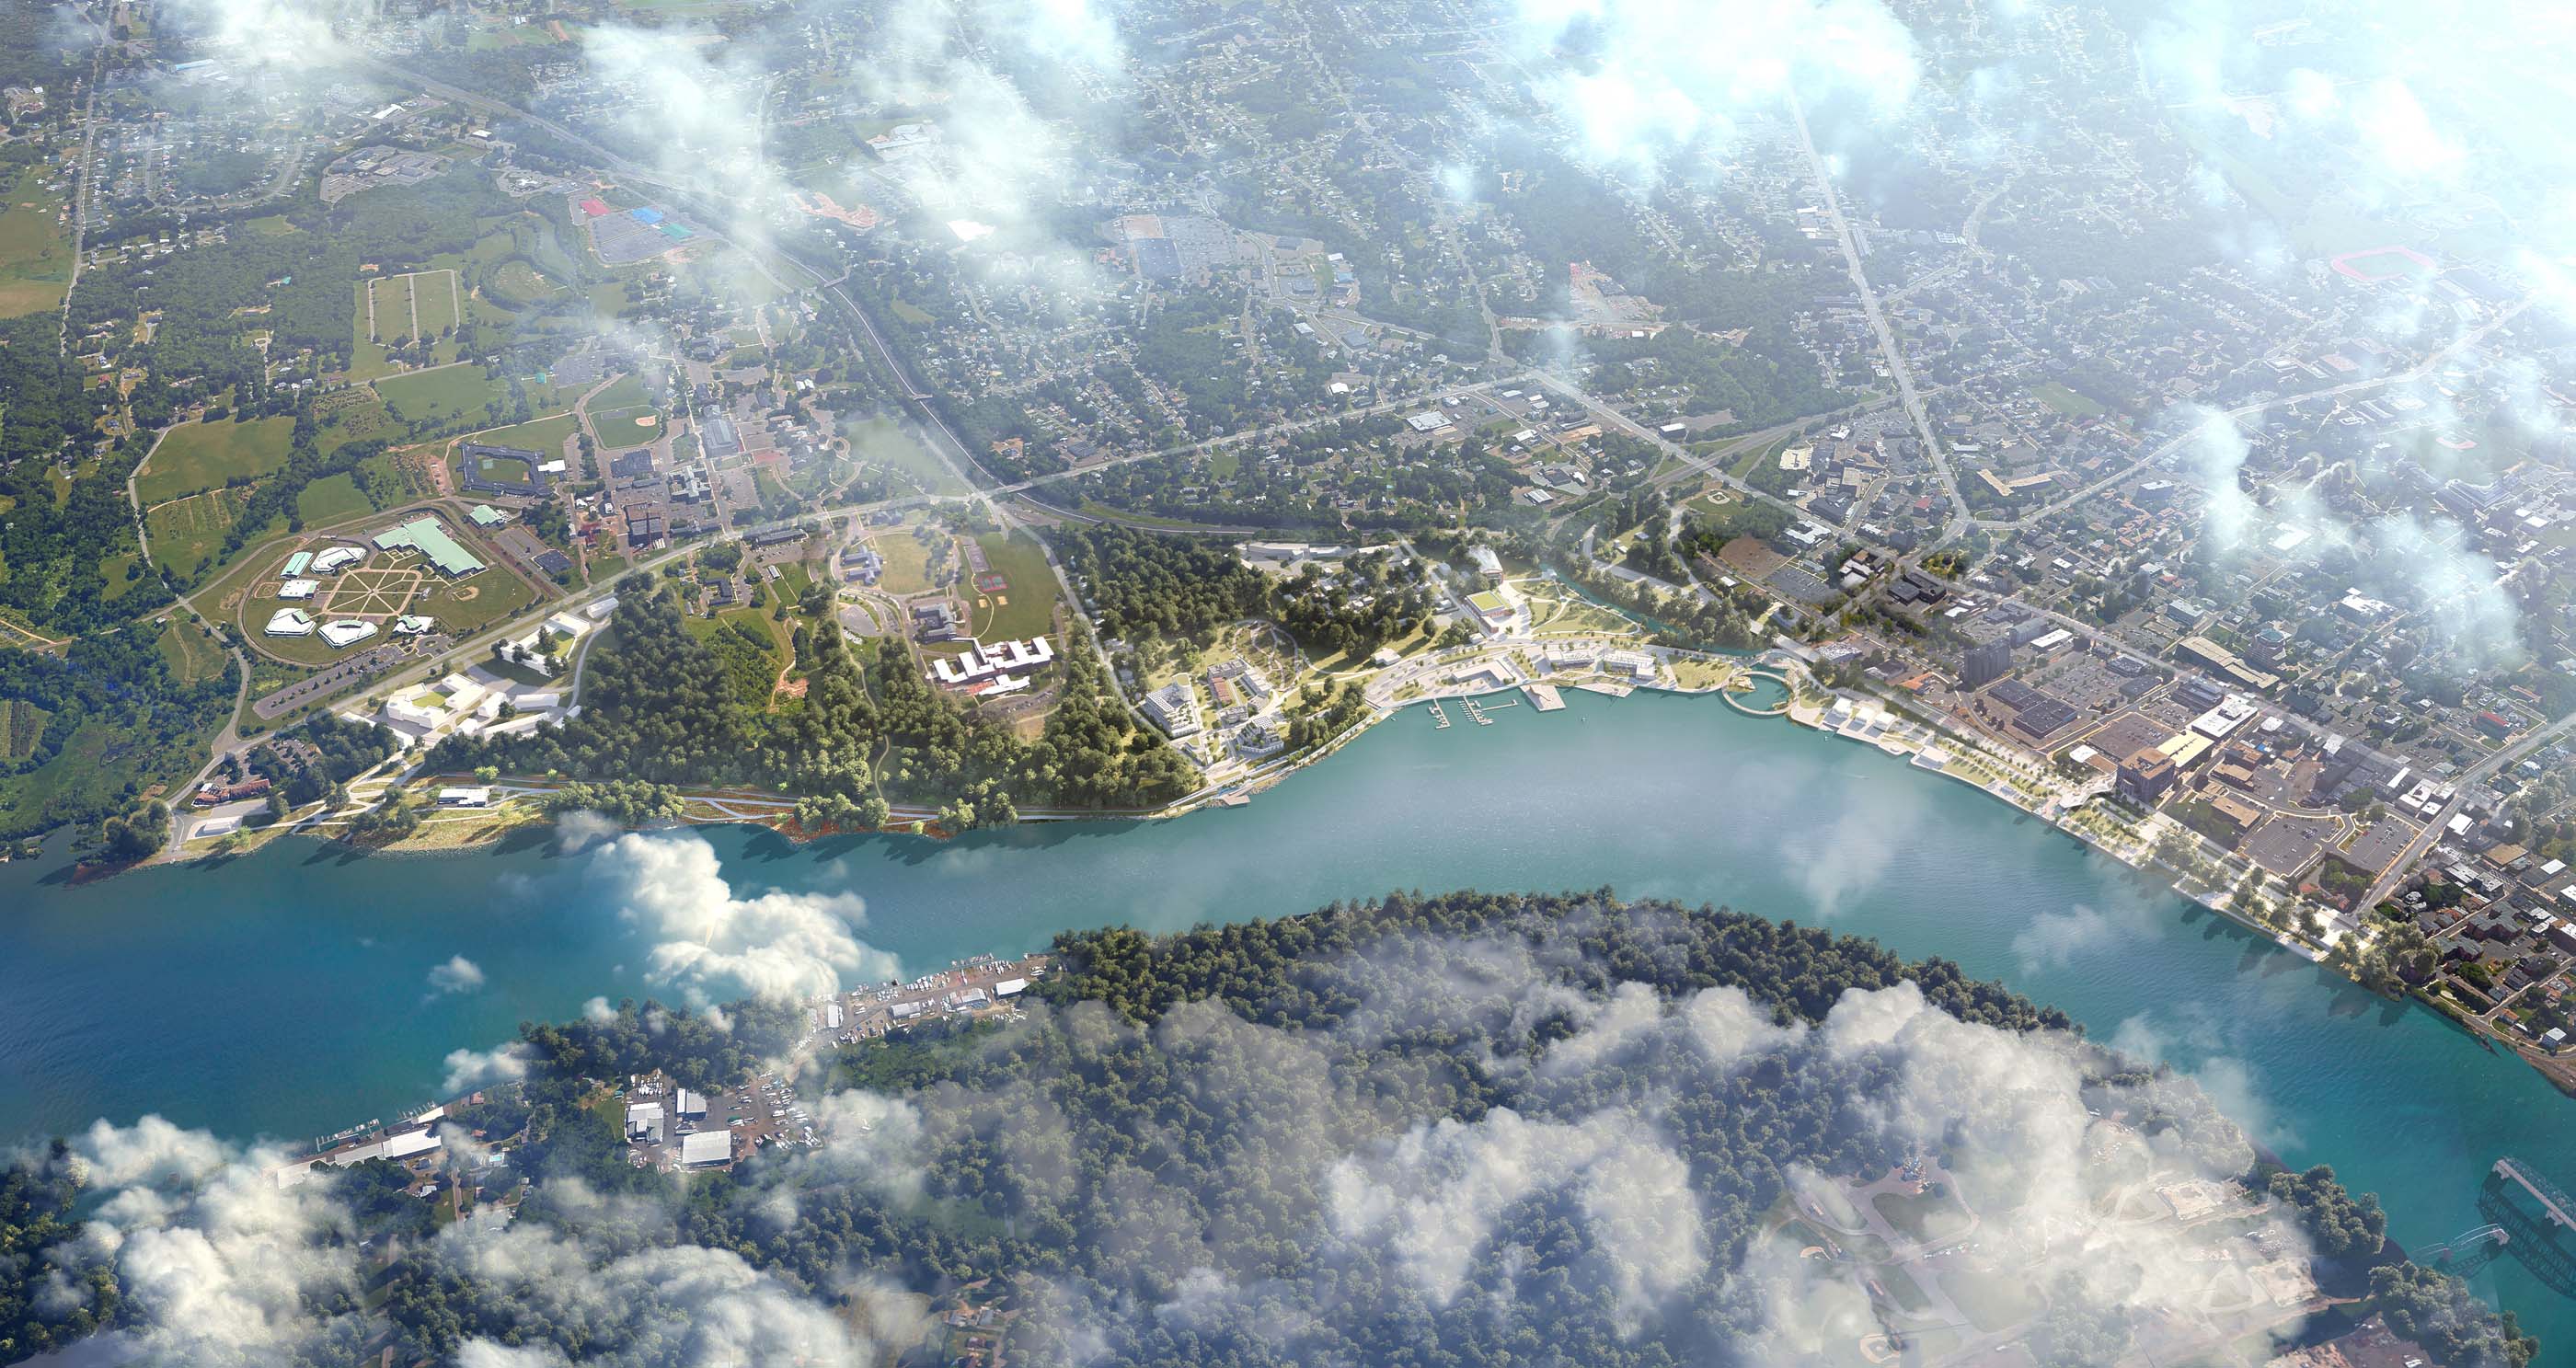 aerial view of the proposed connecticut river redevelopment